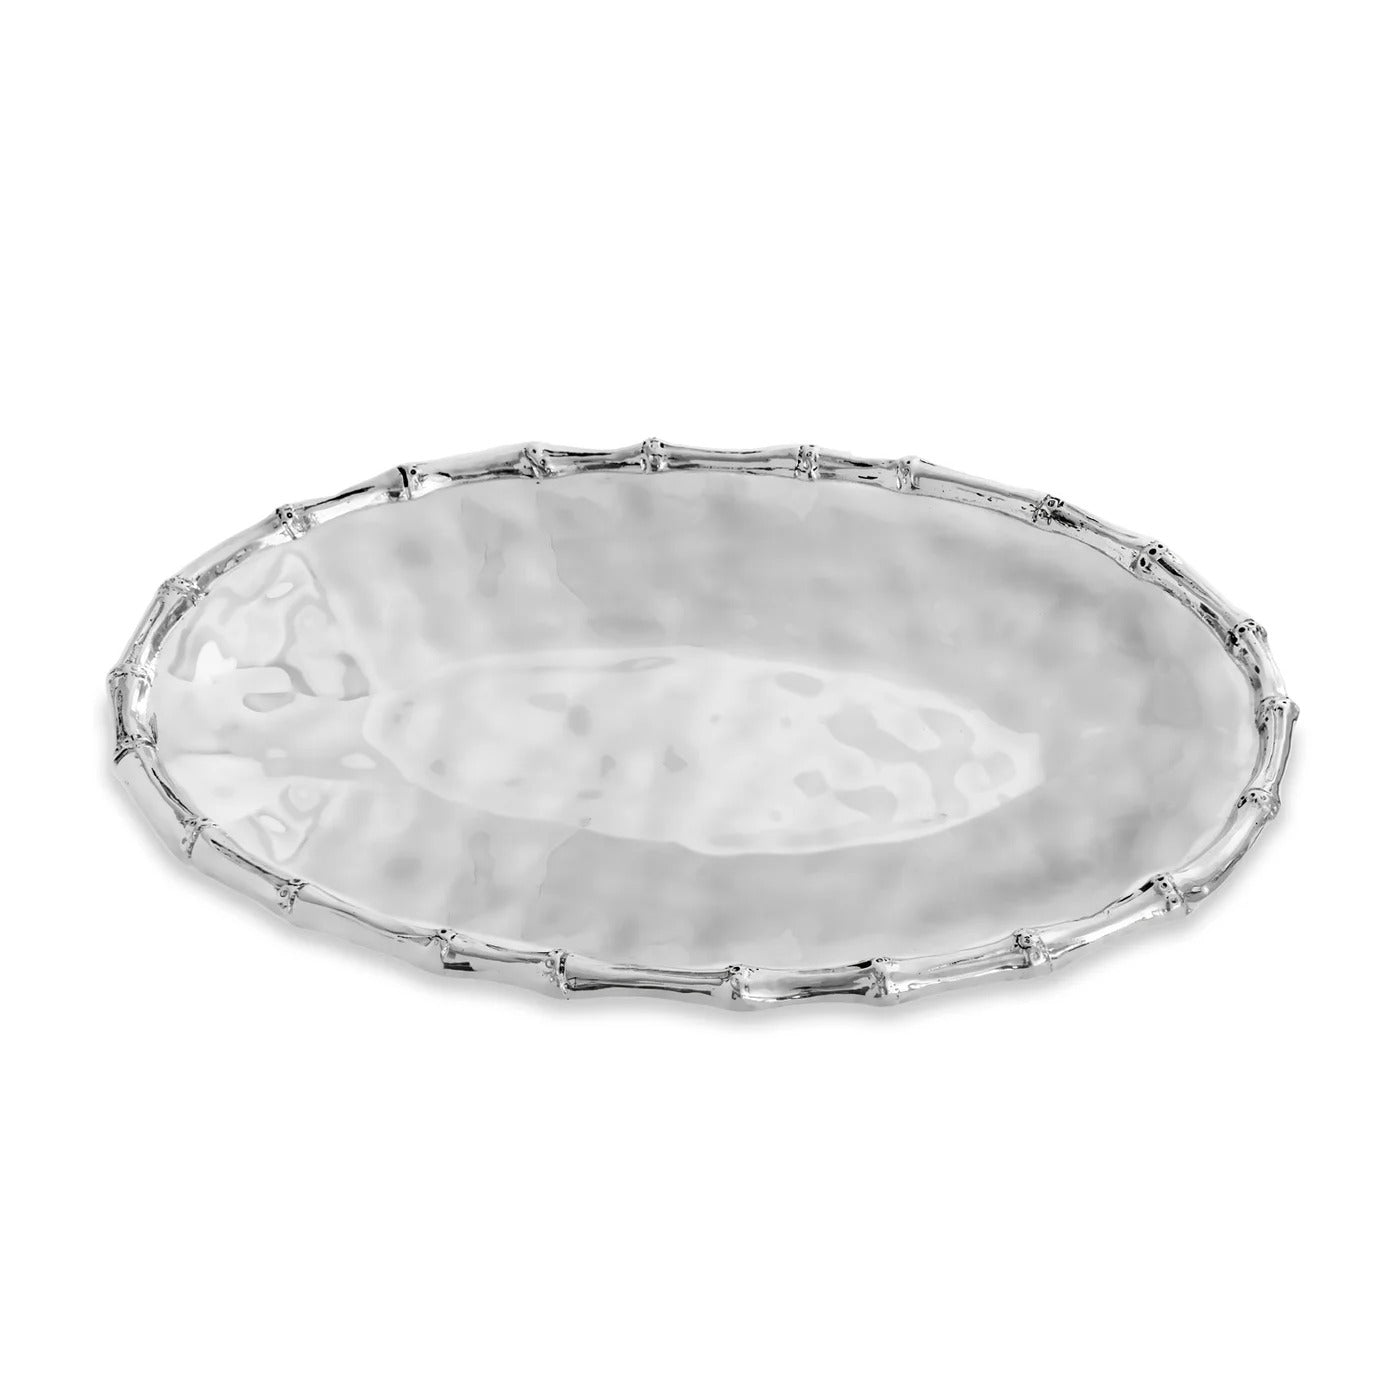 GARDEN Bamboo Large Oval Tray